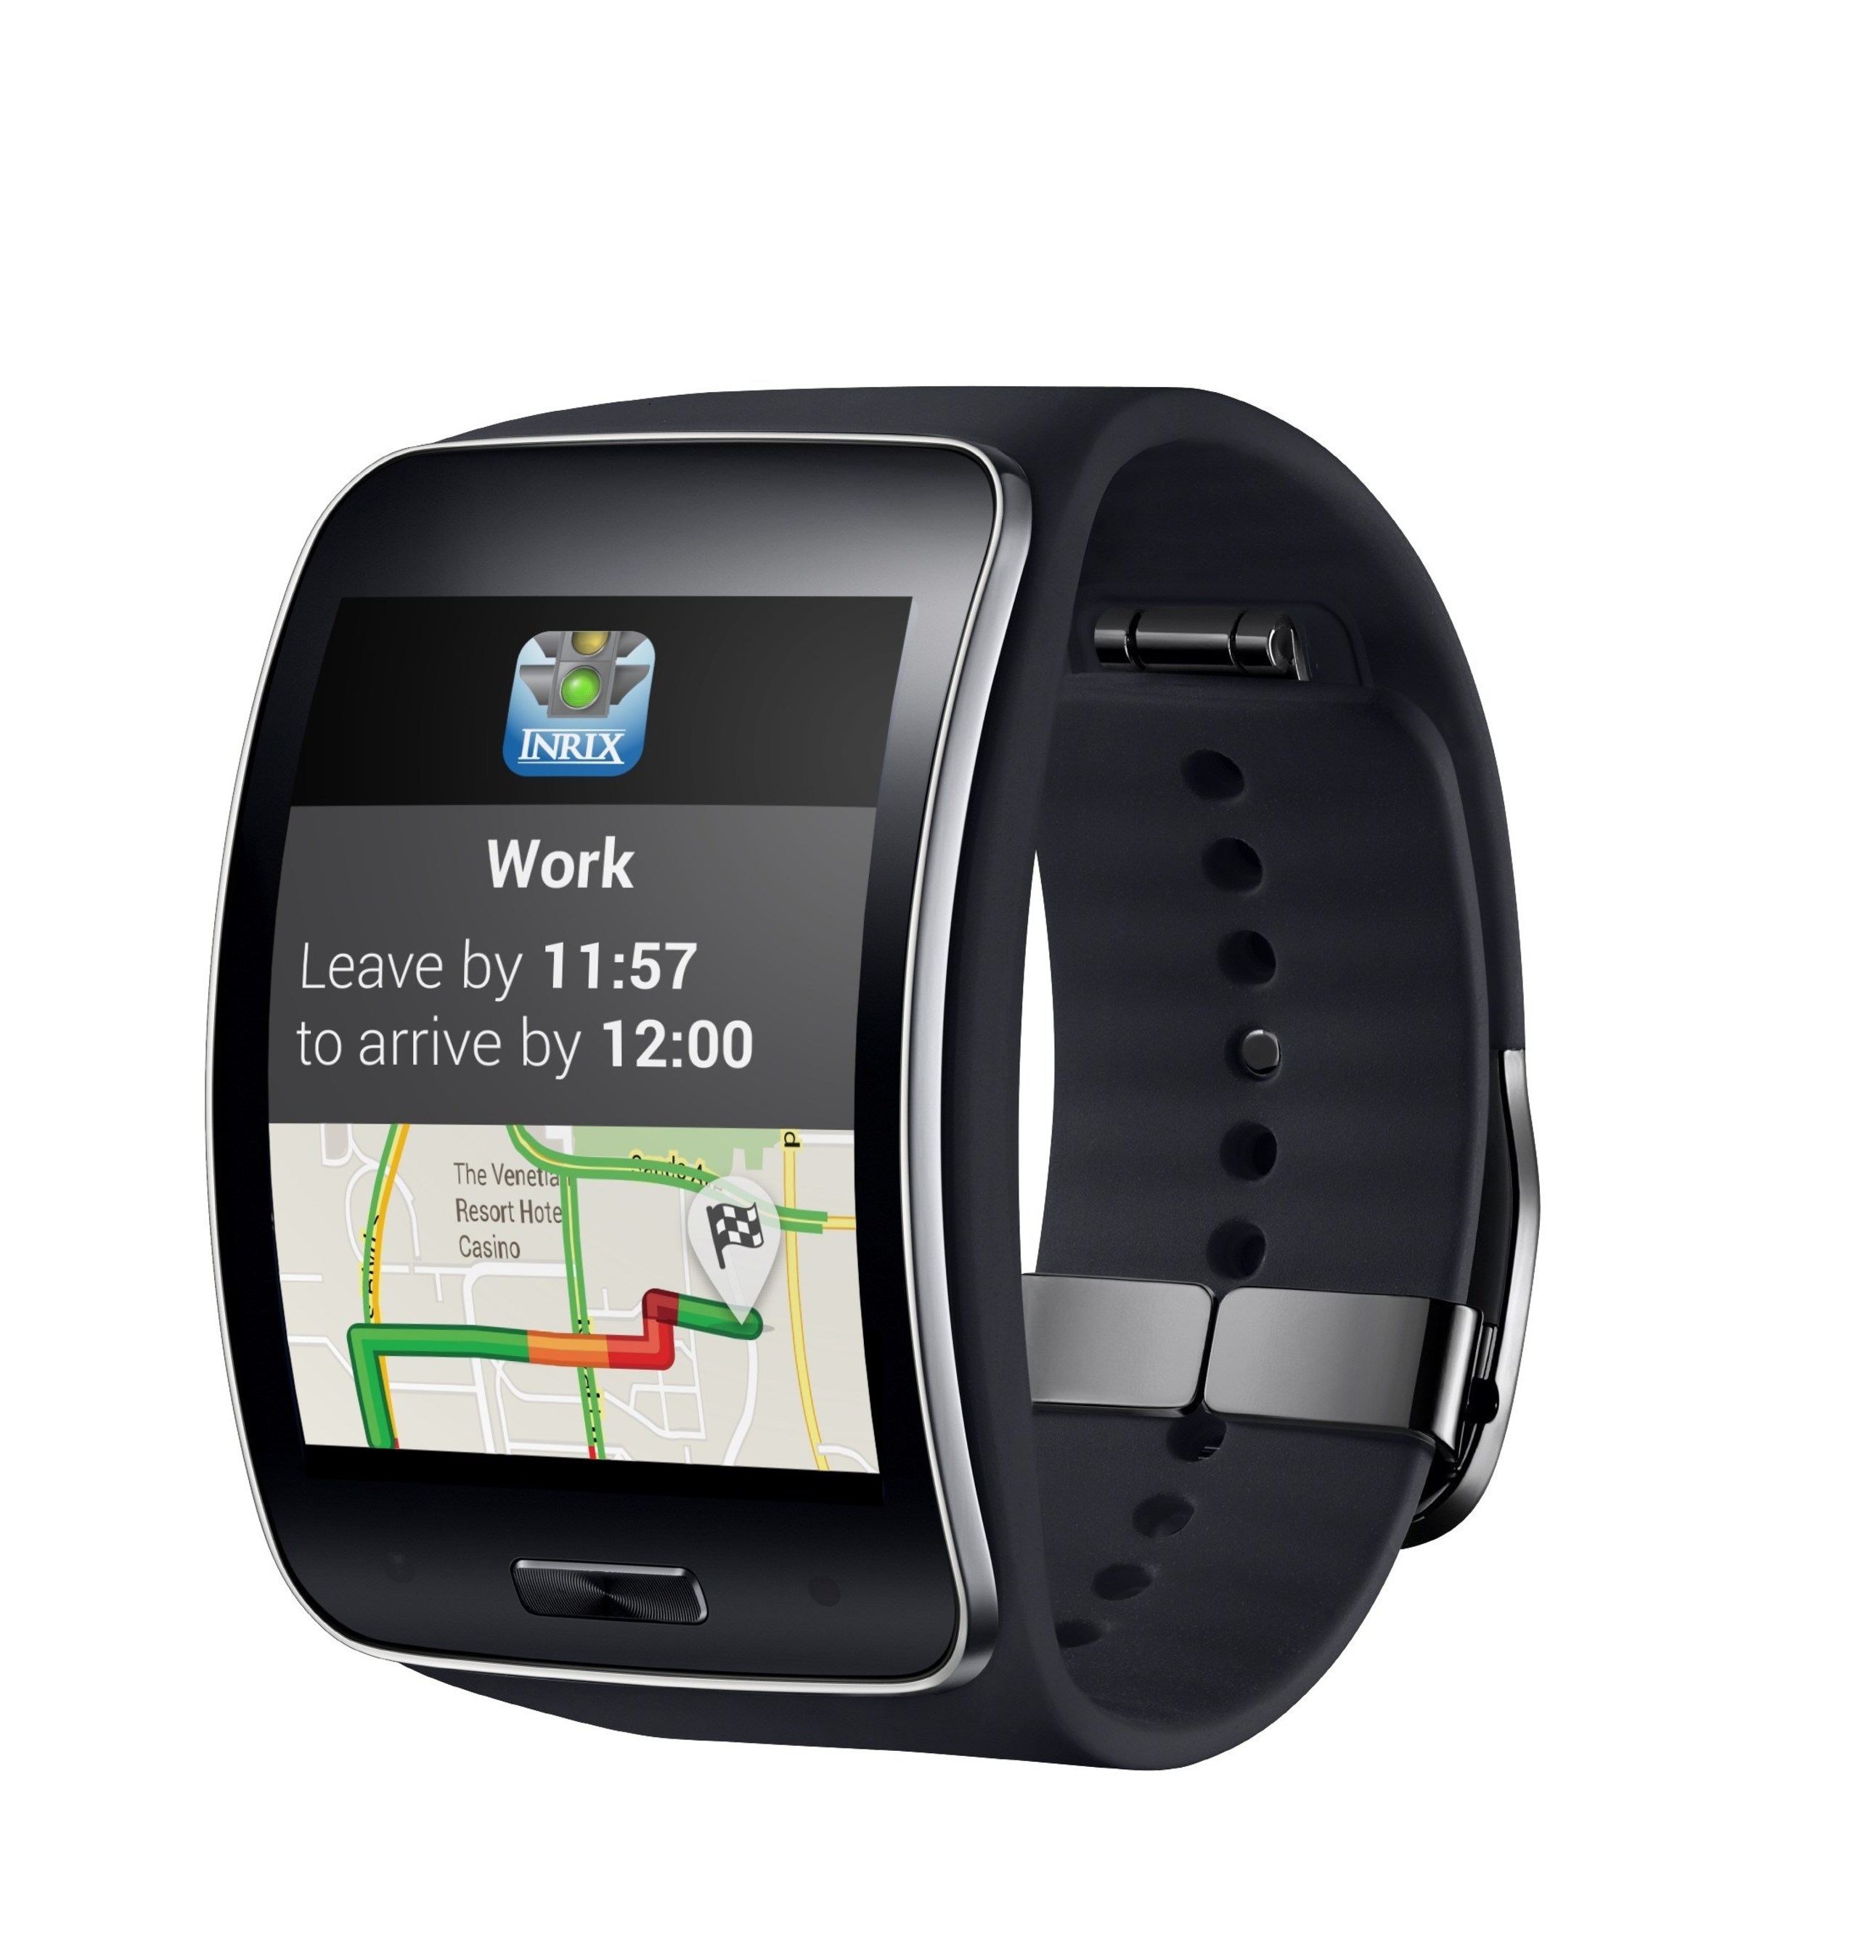 Samsung Gear S owners now can get traffic alerts and recommended departure times in traffic for upcoming trips from their INRIX XD Traffic app right on their smartwatch.